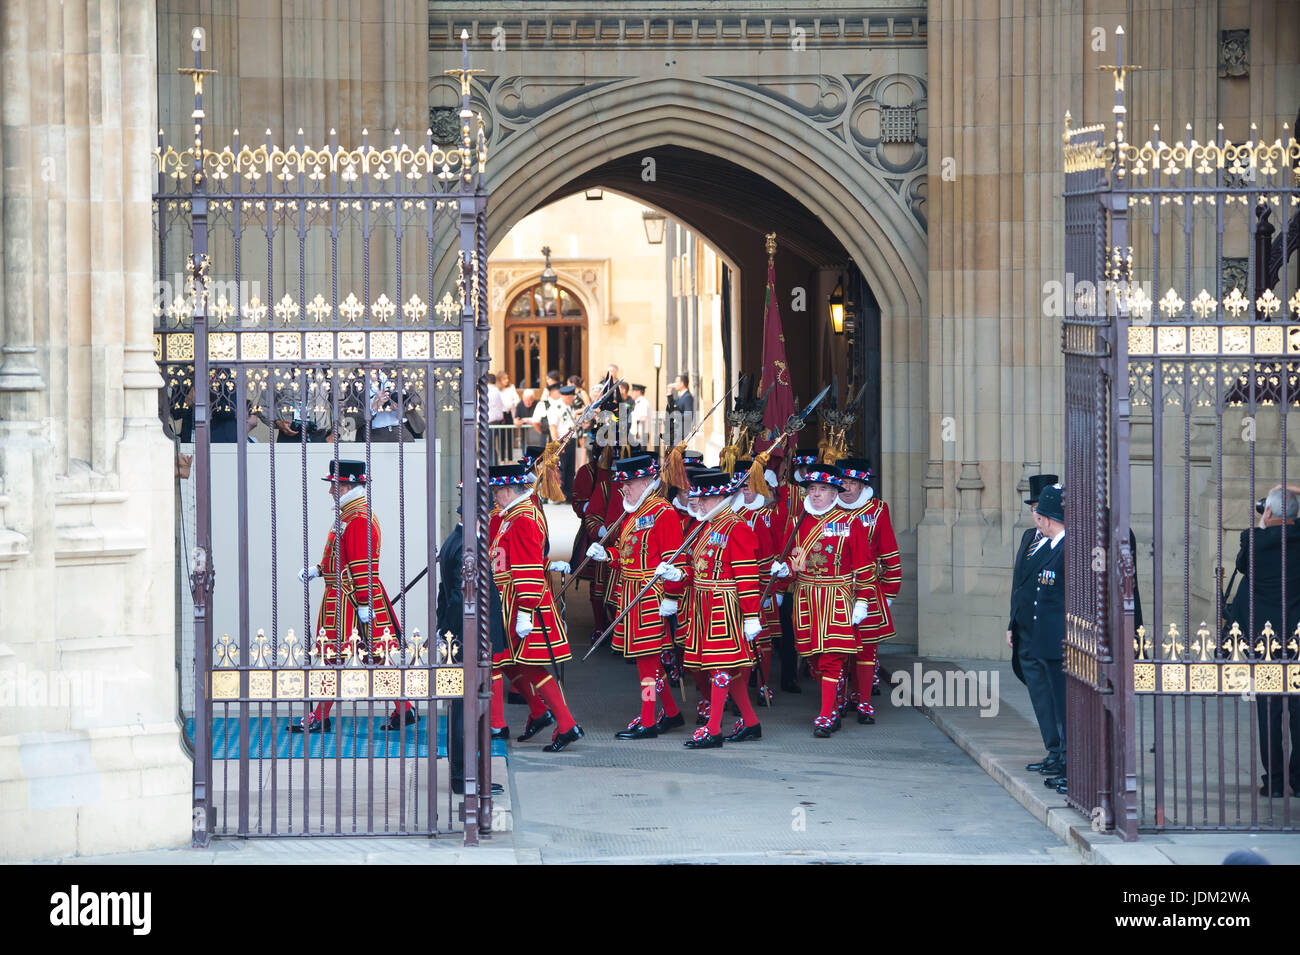 London, United Kingdom. 21st June 2017. Queen Elizabeth II on their way to the Houses of Parliament  before she addresses the State Opening of Parliament in the House of Lords at the Palace of Westminster. The State Opening of Parliament is the formal start of the parliamentary year. This year's Queen's Speech, setting out the government's agenda for the coming session  Michael Tubi / Alamy Live News Stock Photo